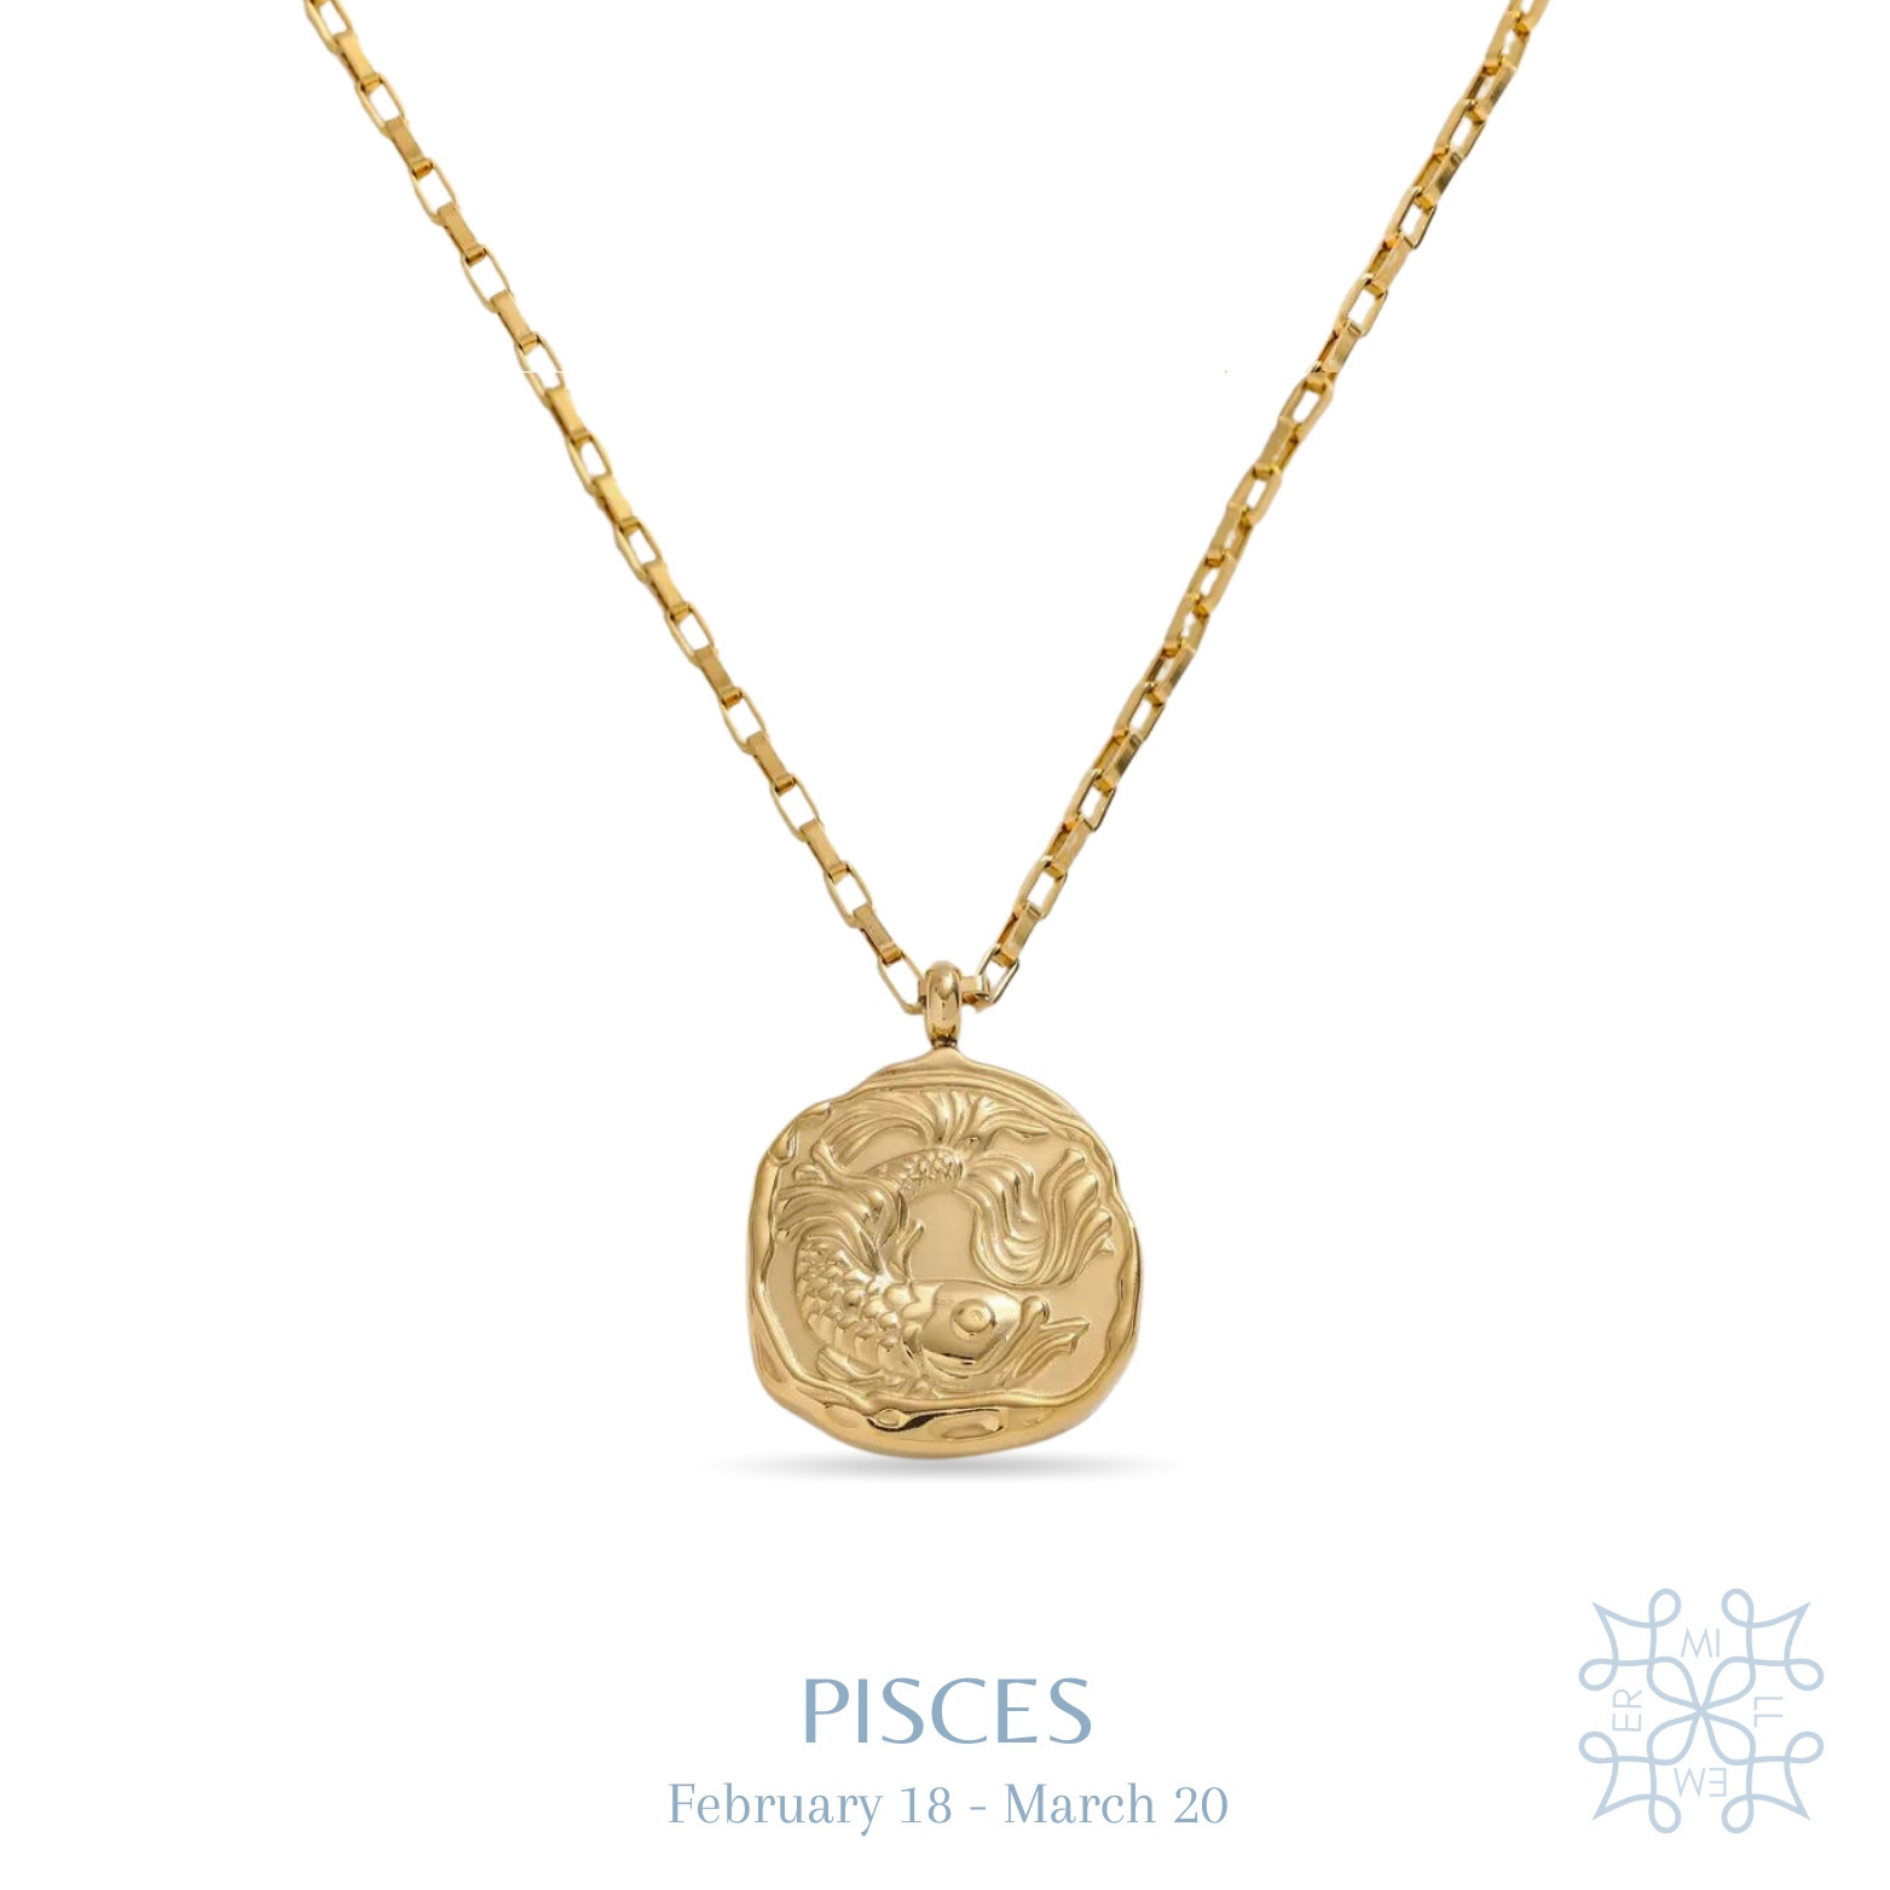 irregular shape round medallion with a khoi fish in the middle. Gold plated chain and medallion necklace. Pisces medallion gold necklace.